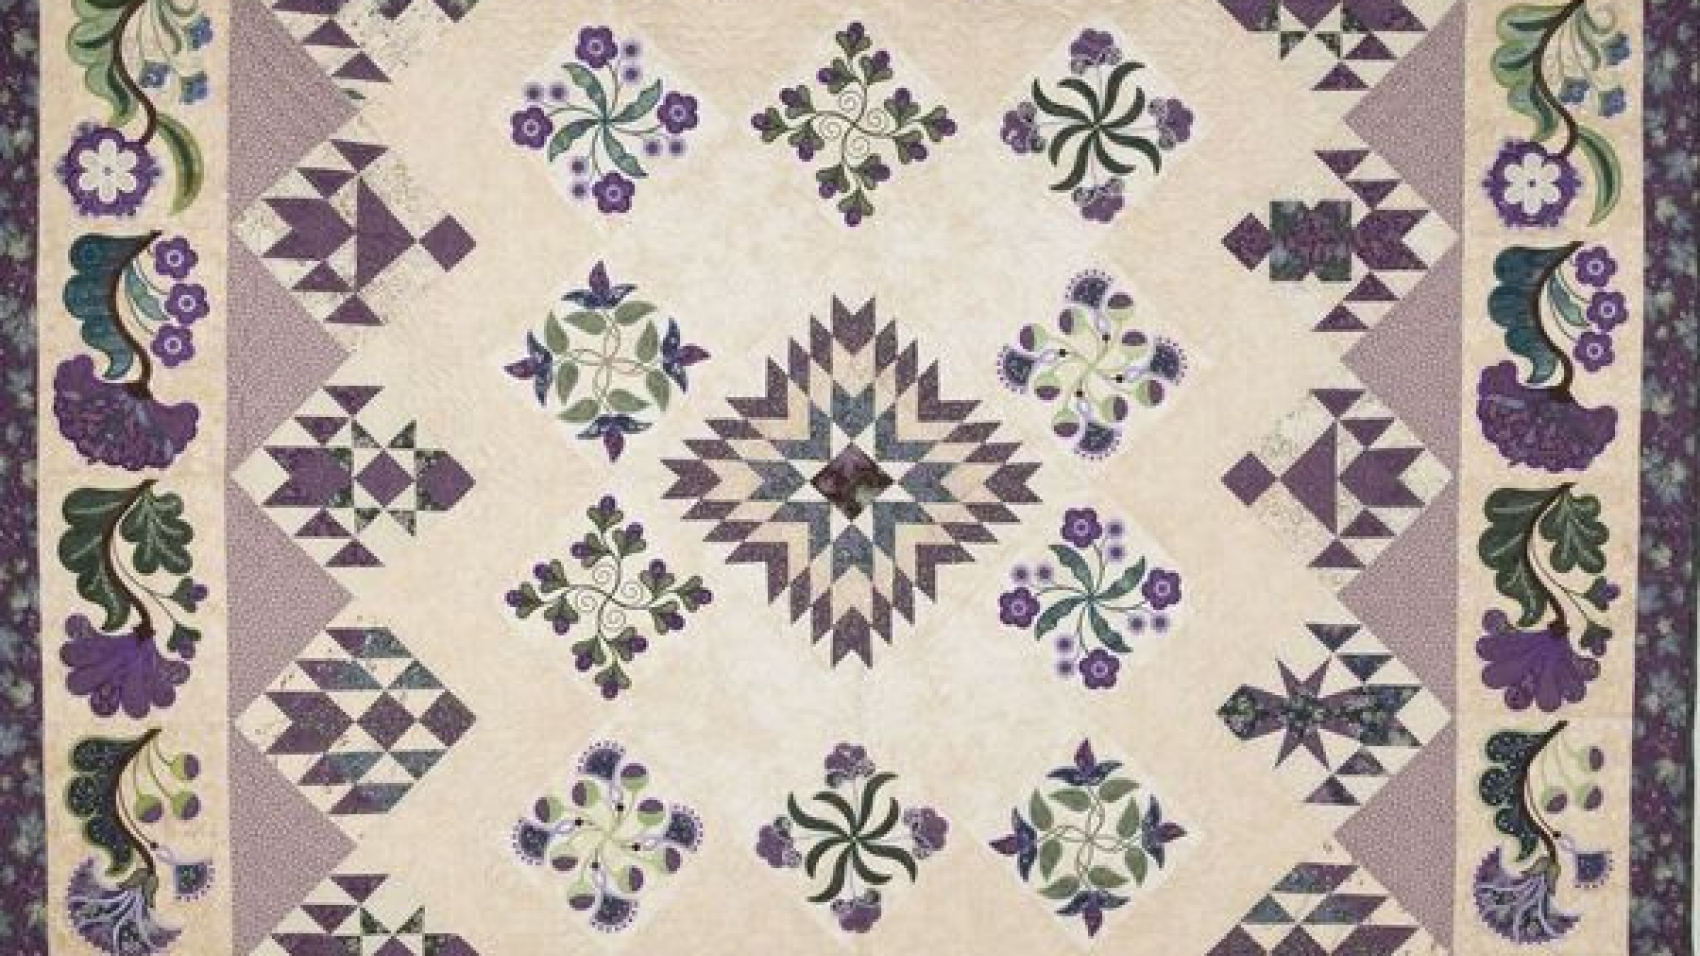 Quilt featuring purple flowers and purple and green shapes on an off-wite and lavendar background.